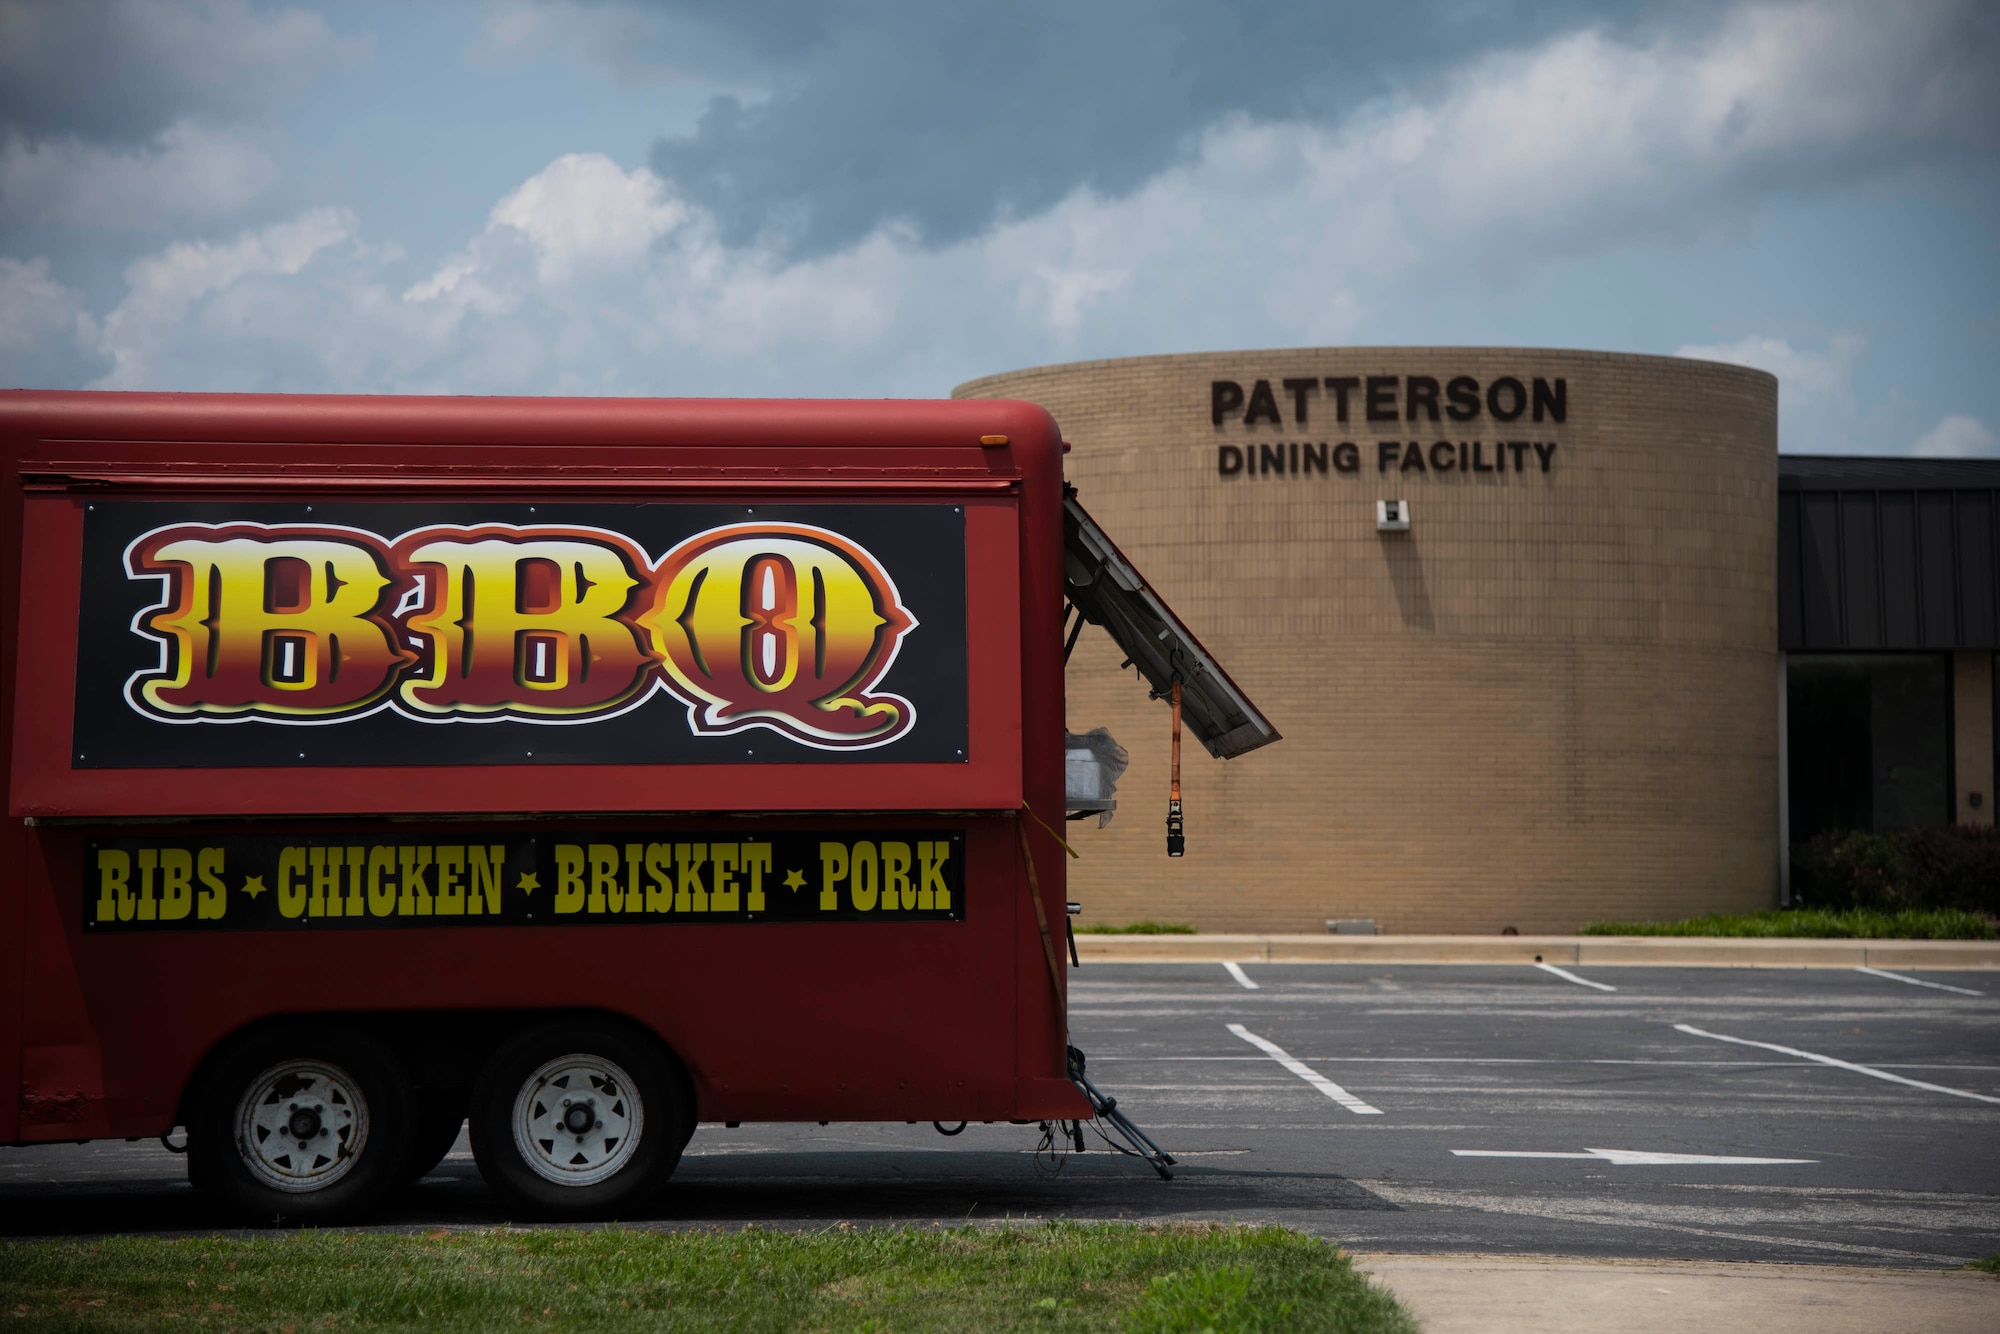 A food truck sits in the Patterson Dining Facility parking lot at Dover Air Force Base, Delaware, July 15, 2021. The 436th Force Support Squadron coordinated bringing various food trucks onto Dover AFB to provide options for Airmen during DFAC renovations. (U.S. Air Force photo by Tech. Sgt. J.D. Strong II)